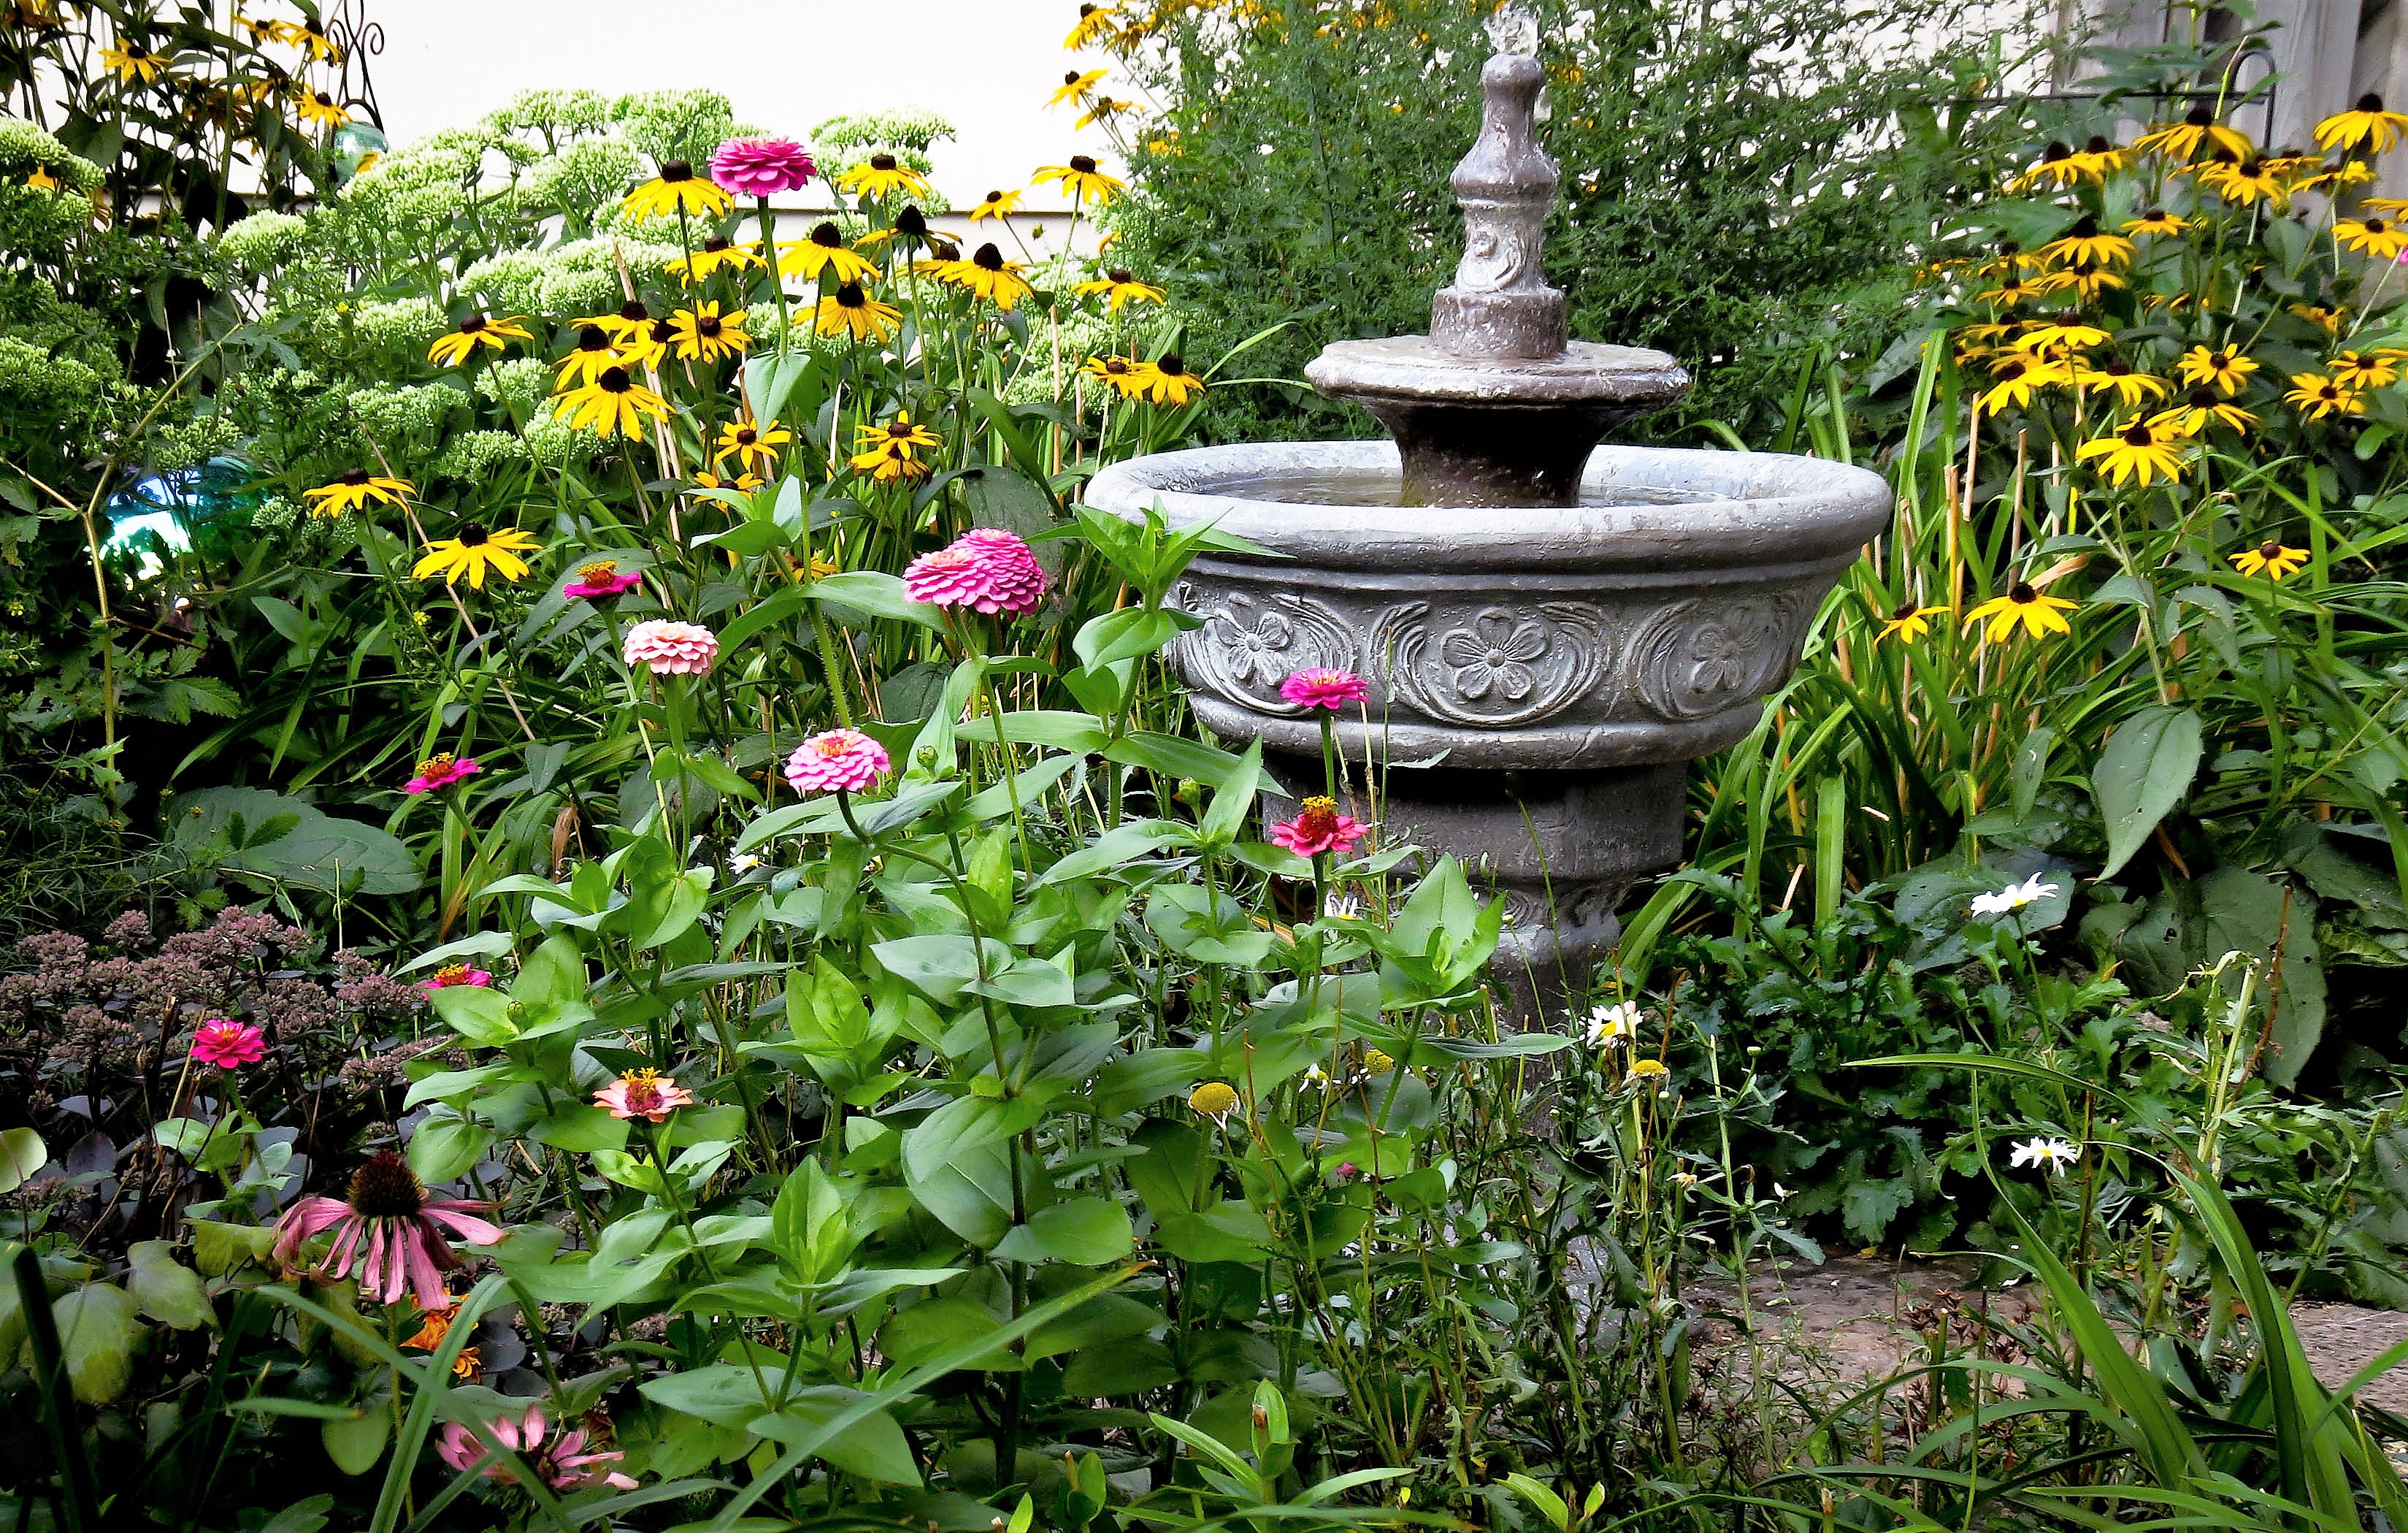 Photo of a garden for an article about weekend events in Plainfield.